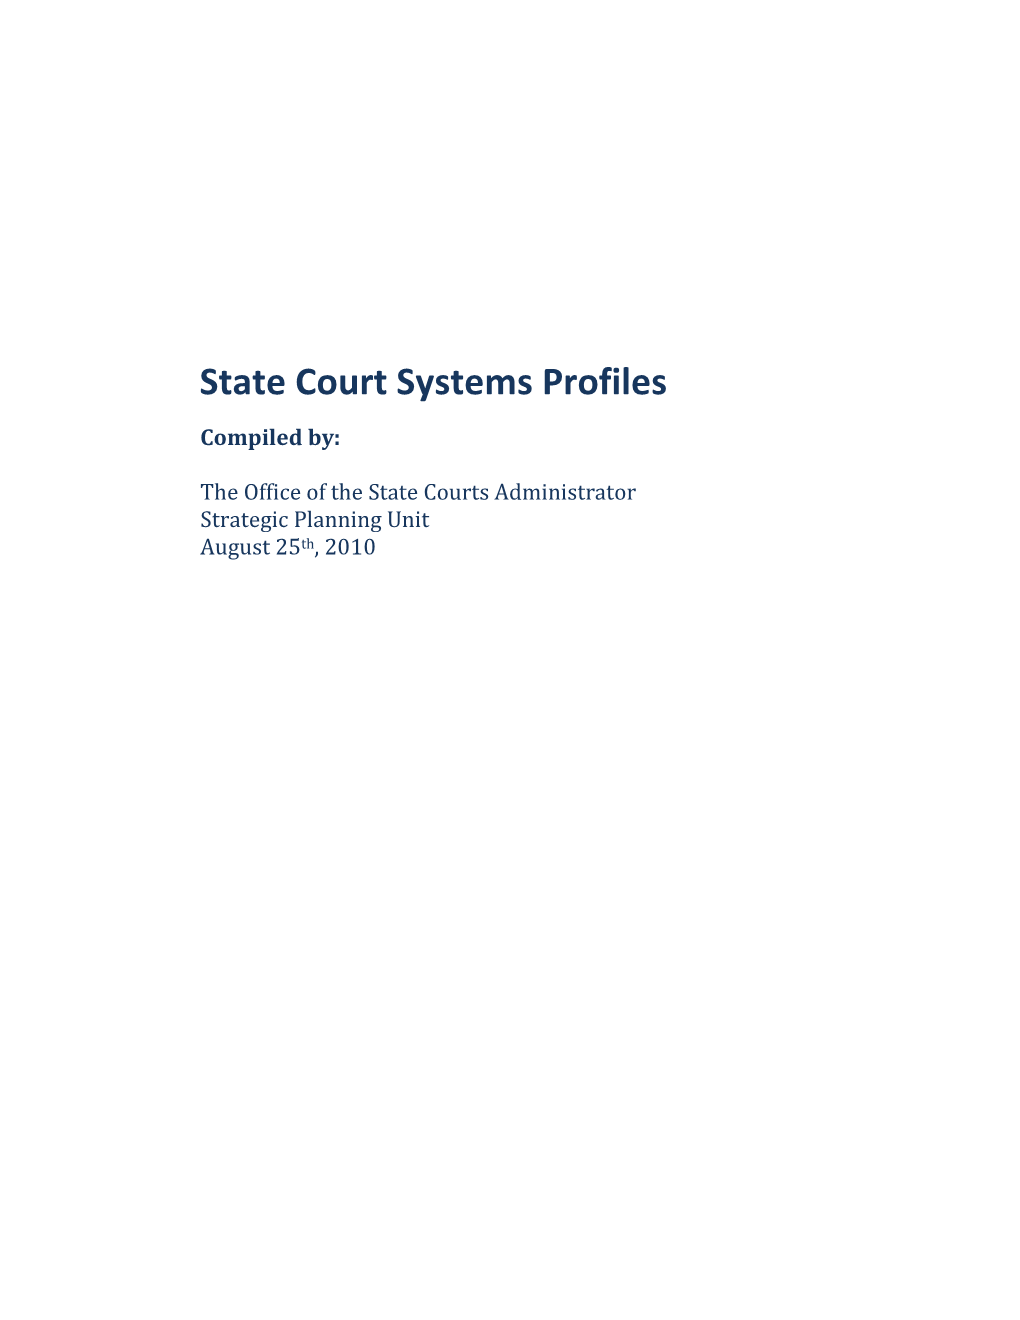 State Court Systems Profiles Comparative Research